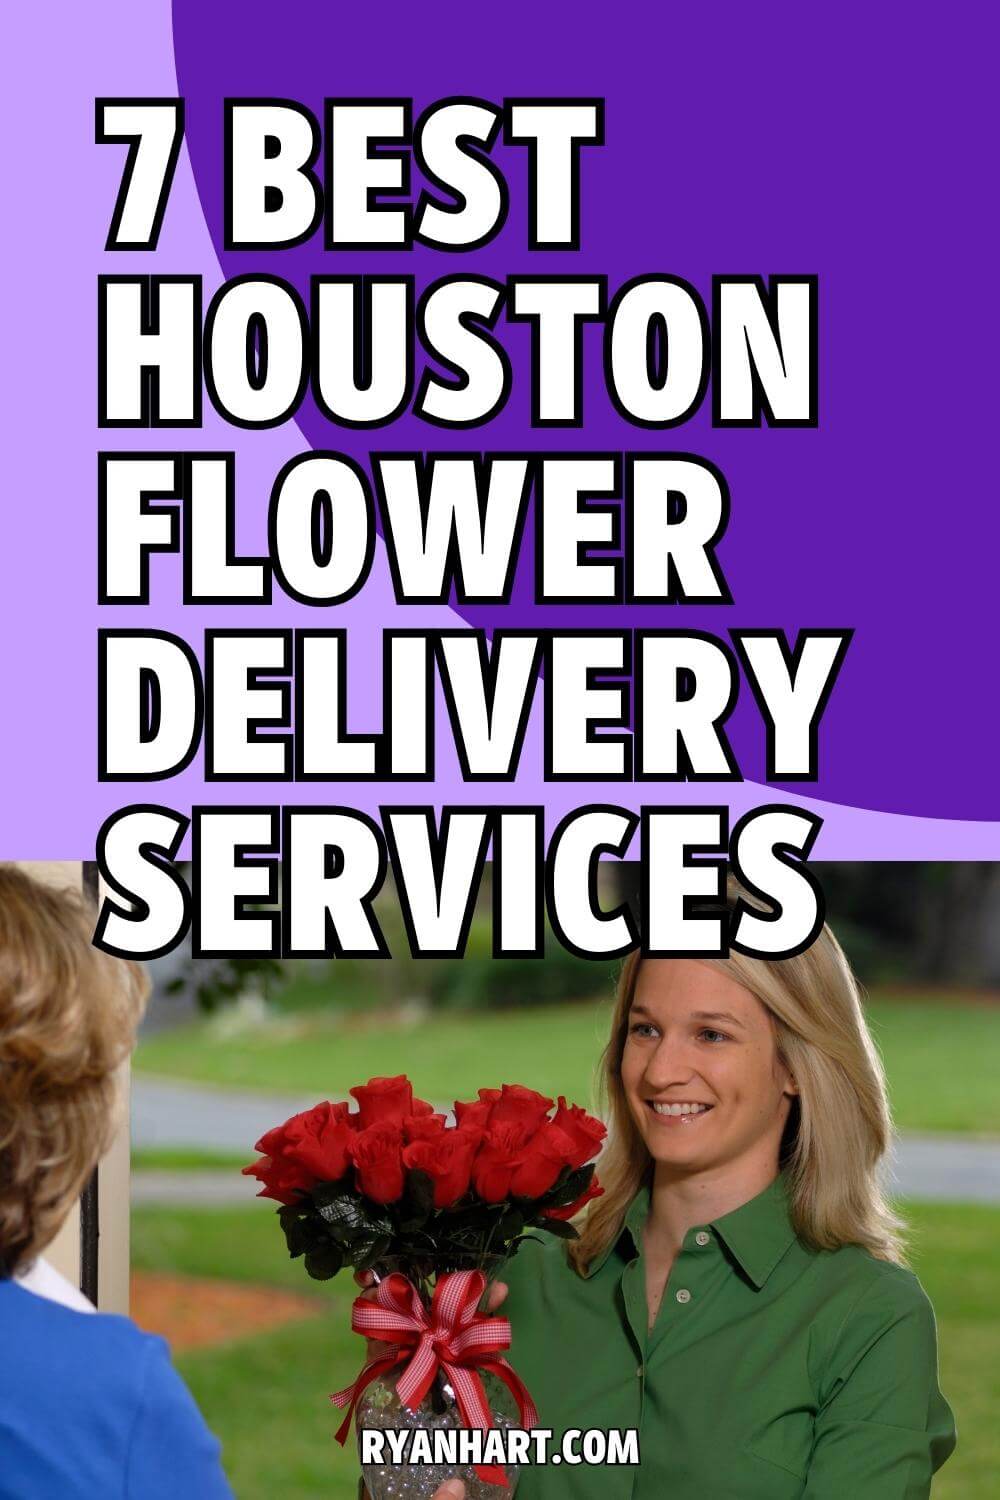 Woman delivering bouquet of roses